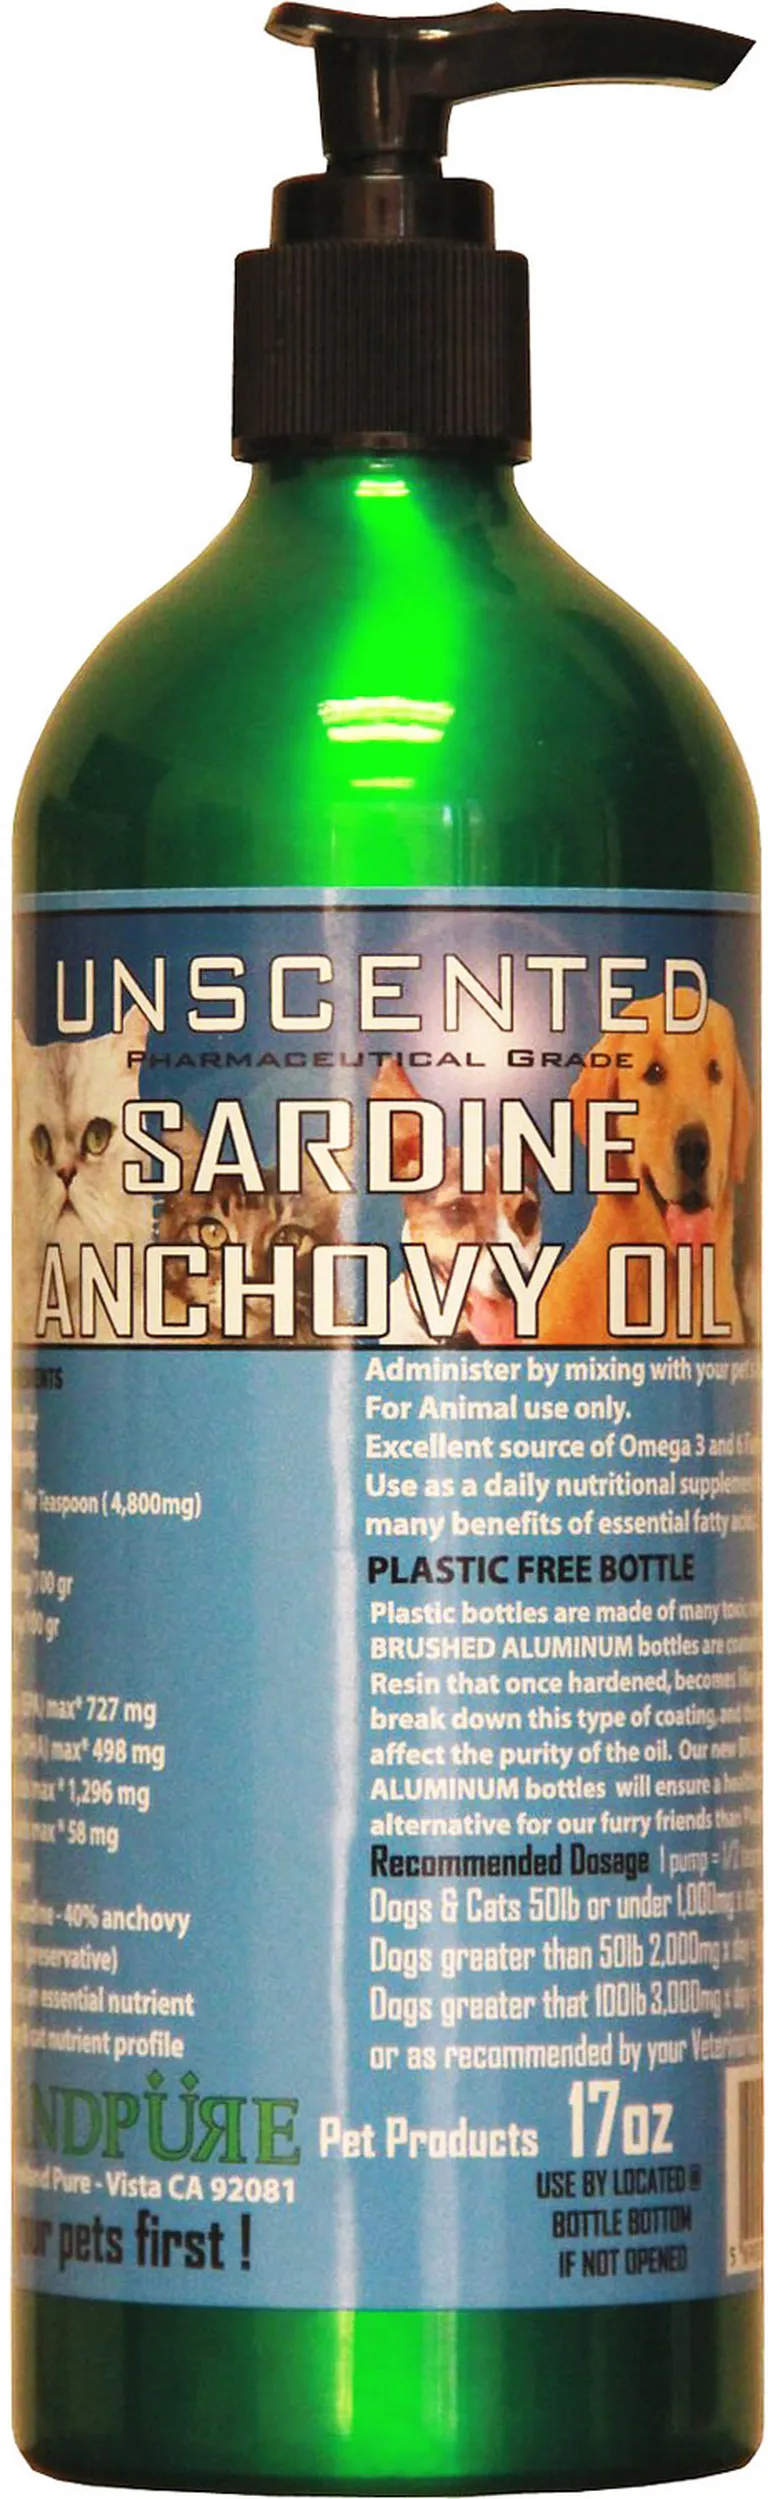 Iceland Pure Sardine Anchovy Oil Photo 2